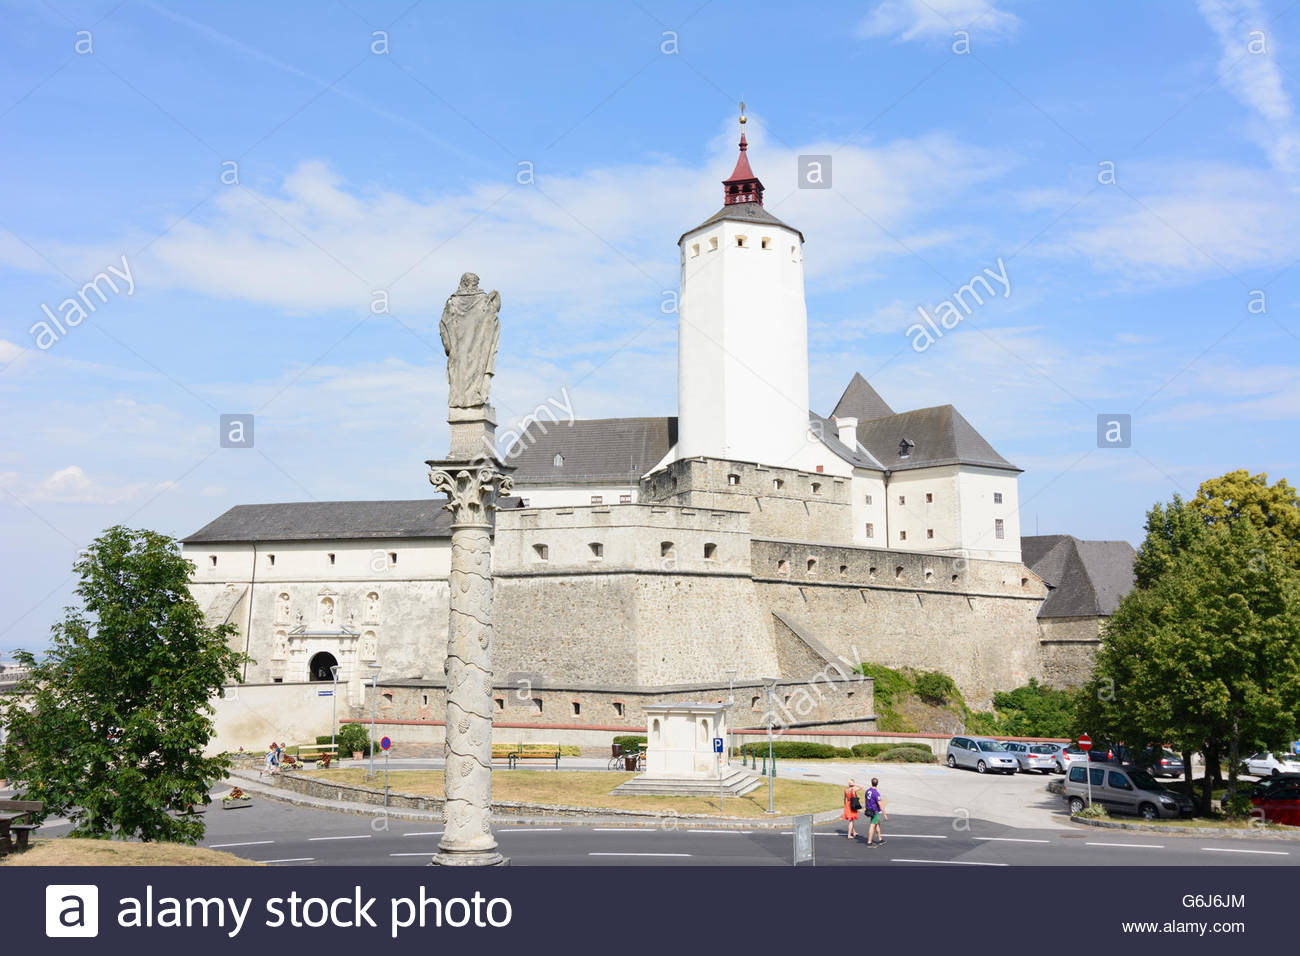 Amazing Forchtenstein Castle Pictures & Backgrounds